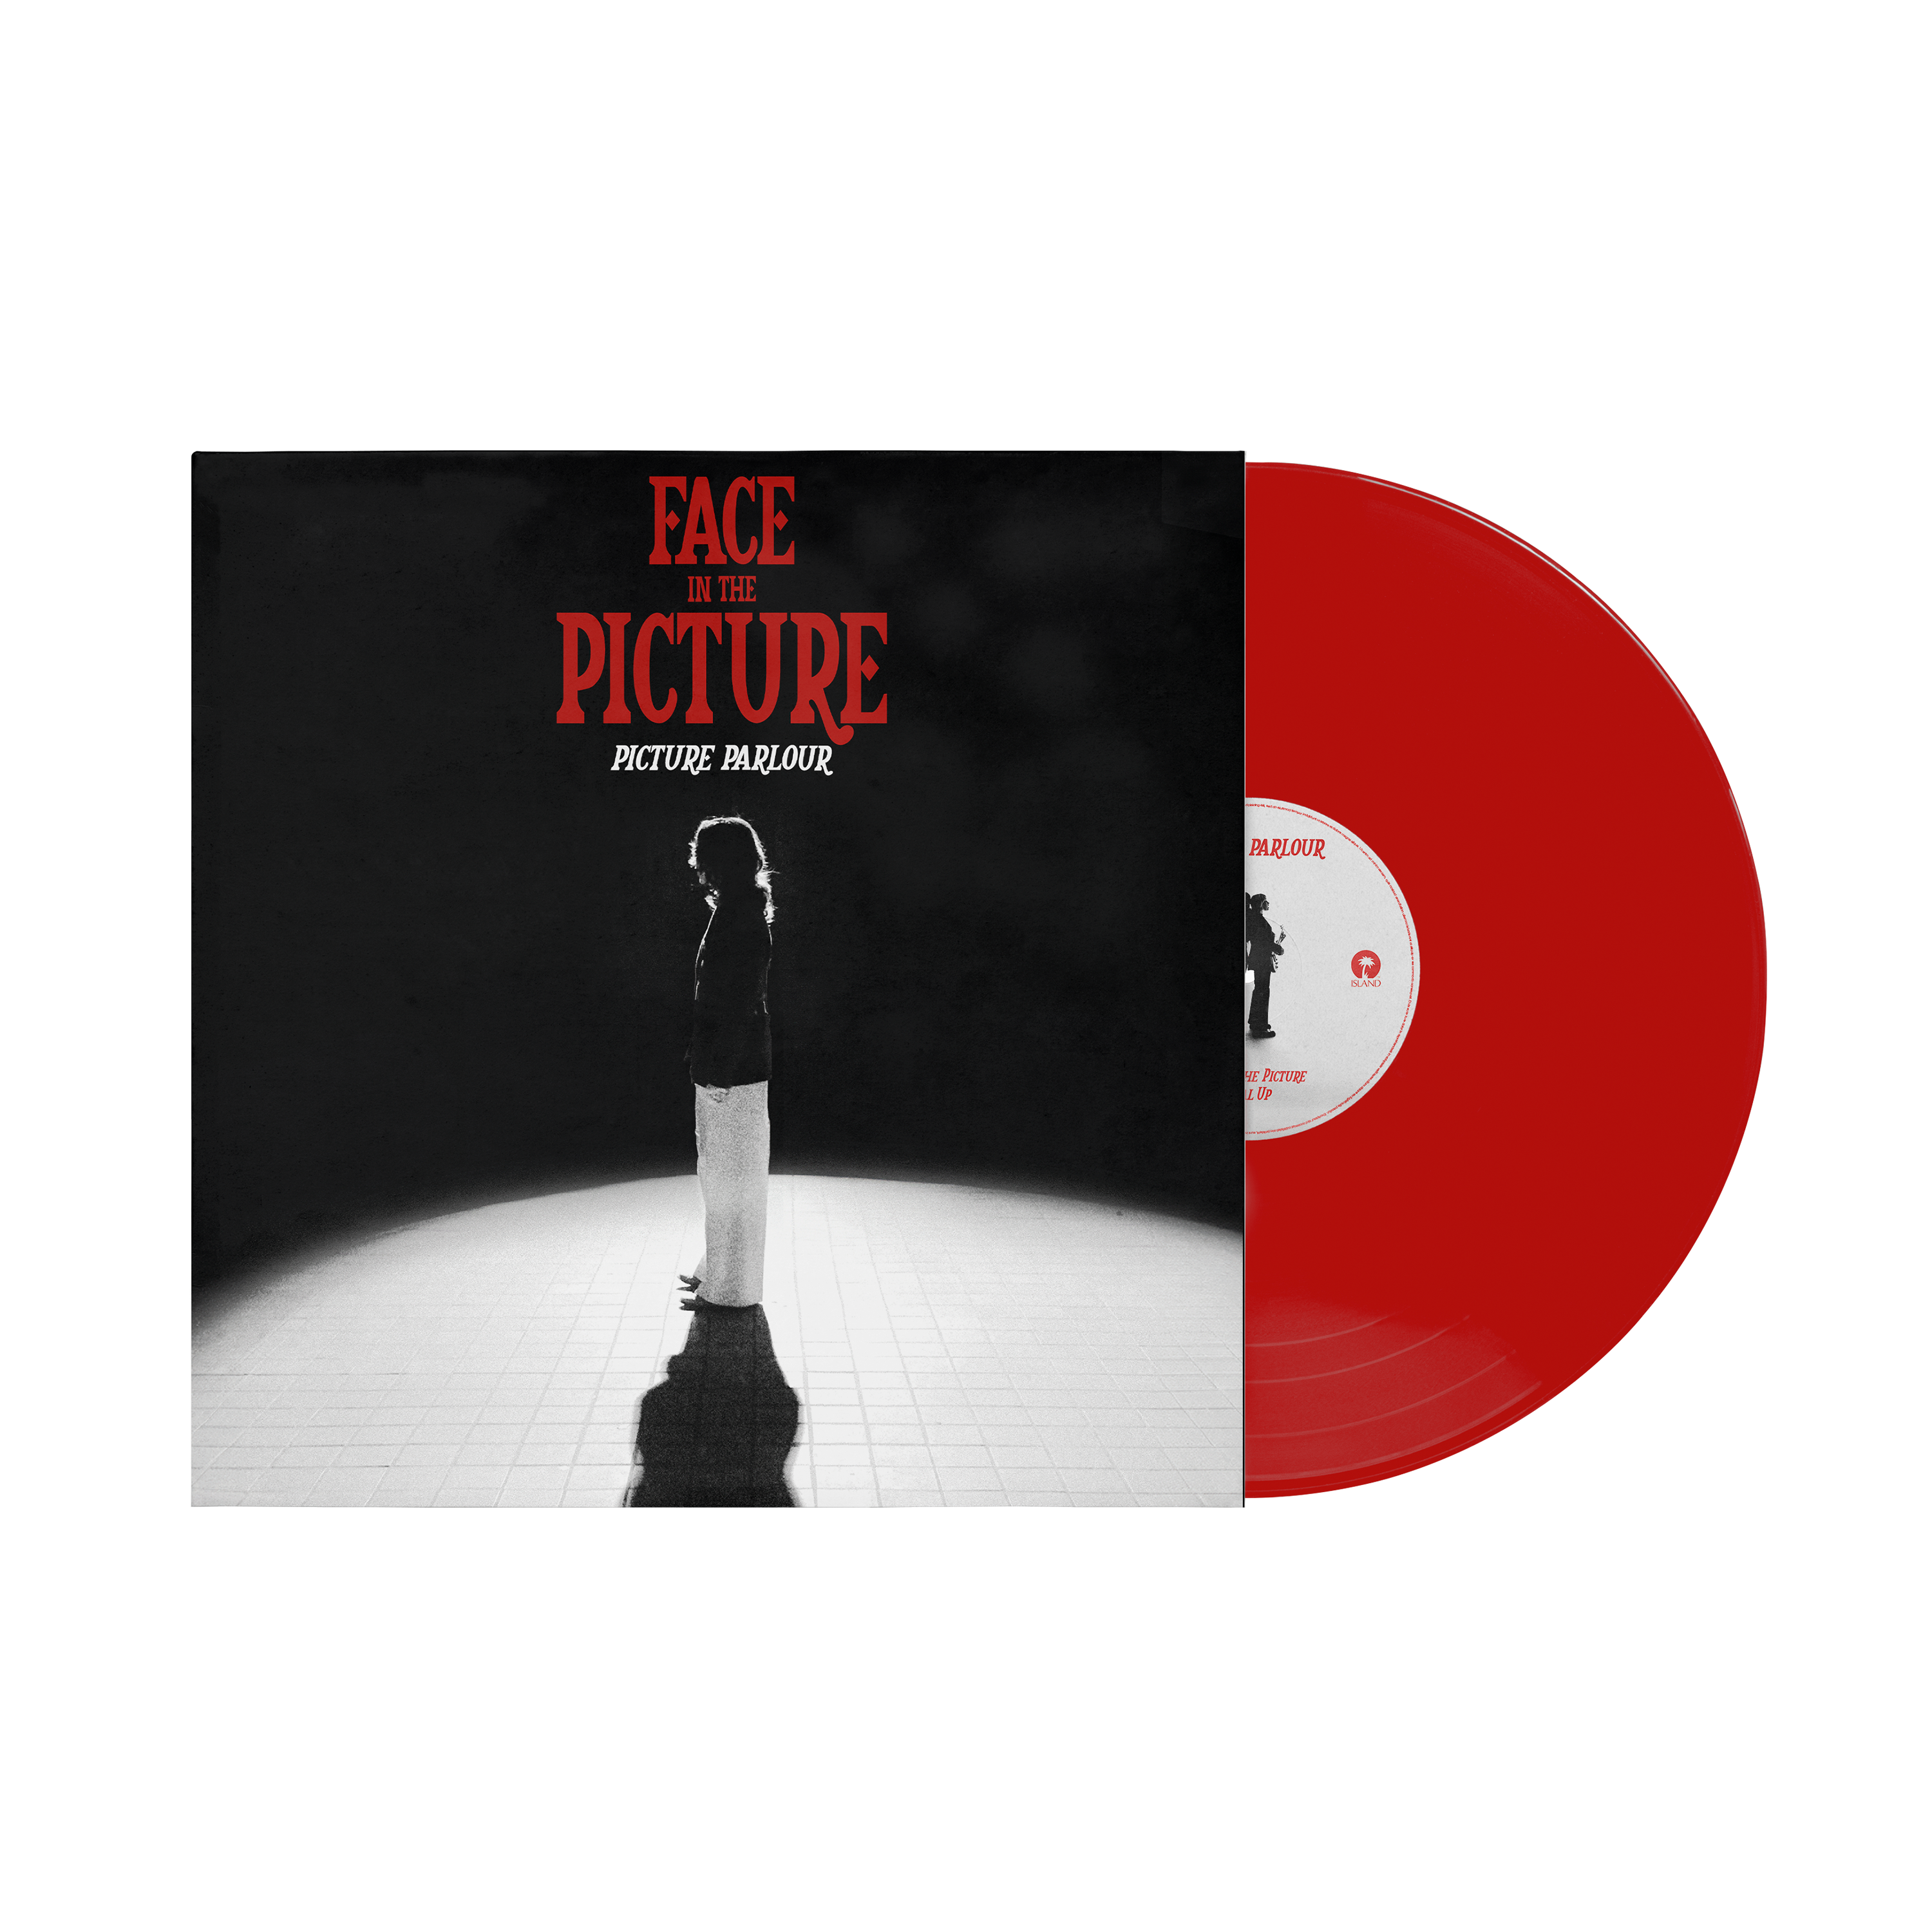 Picture Parlour - Face In The Picture Vinyl 12" EP